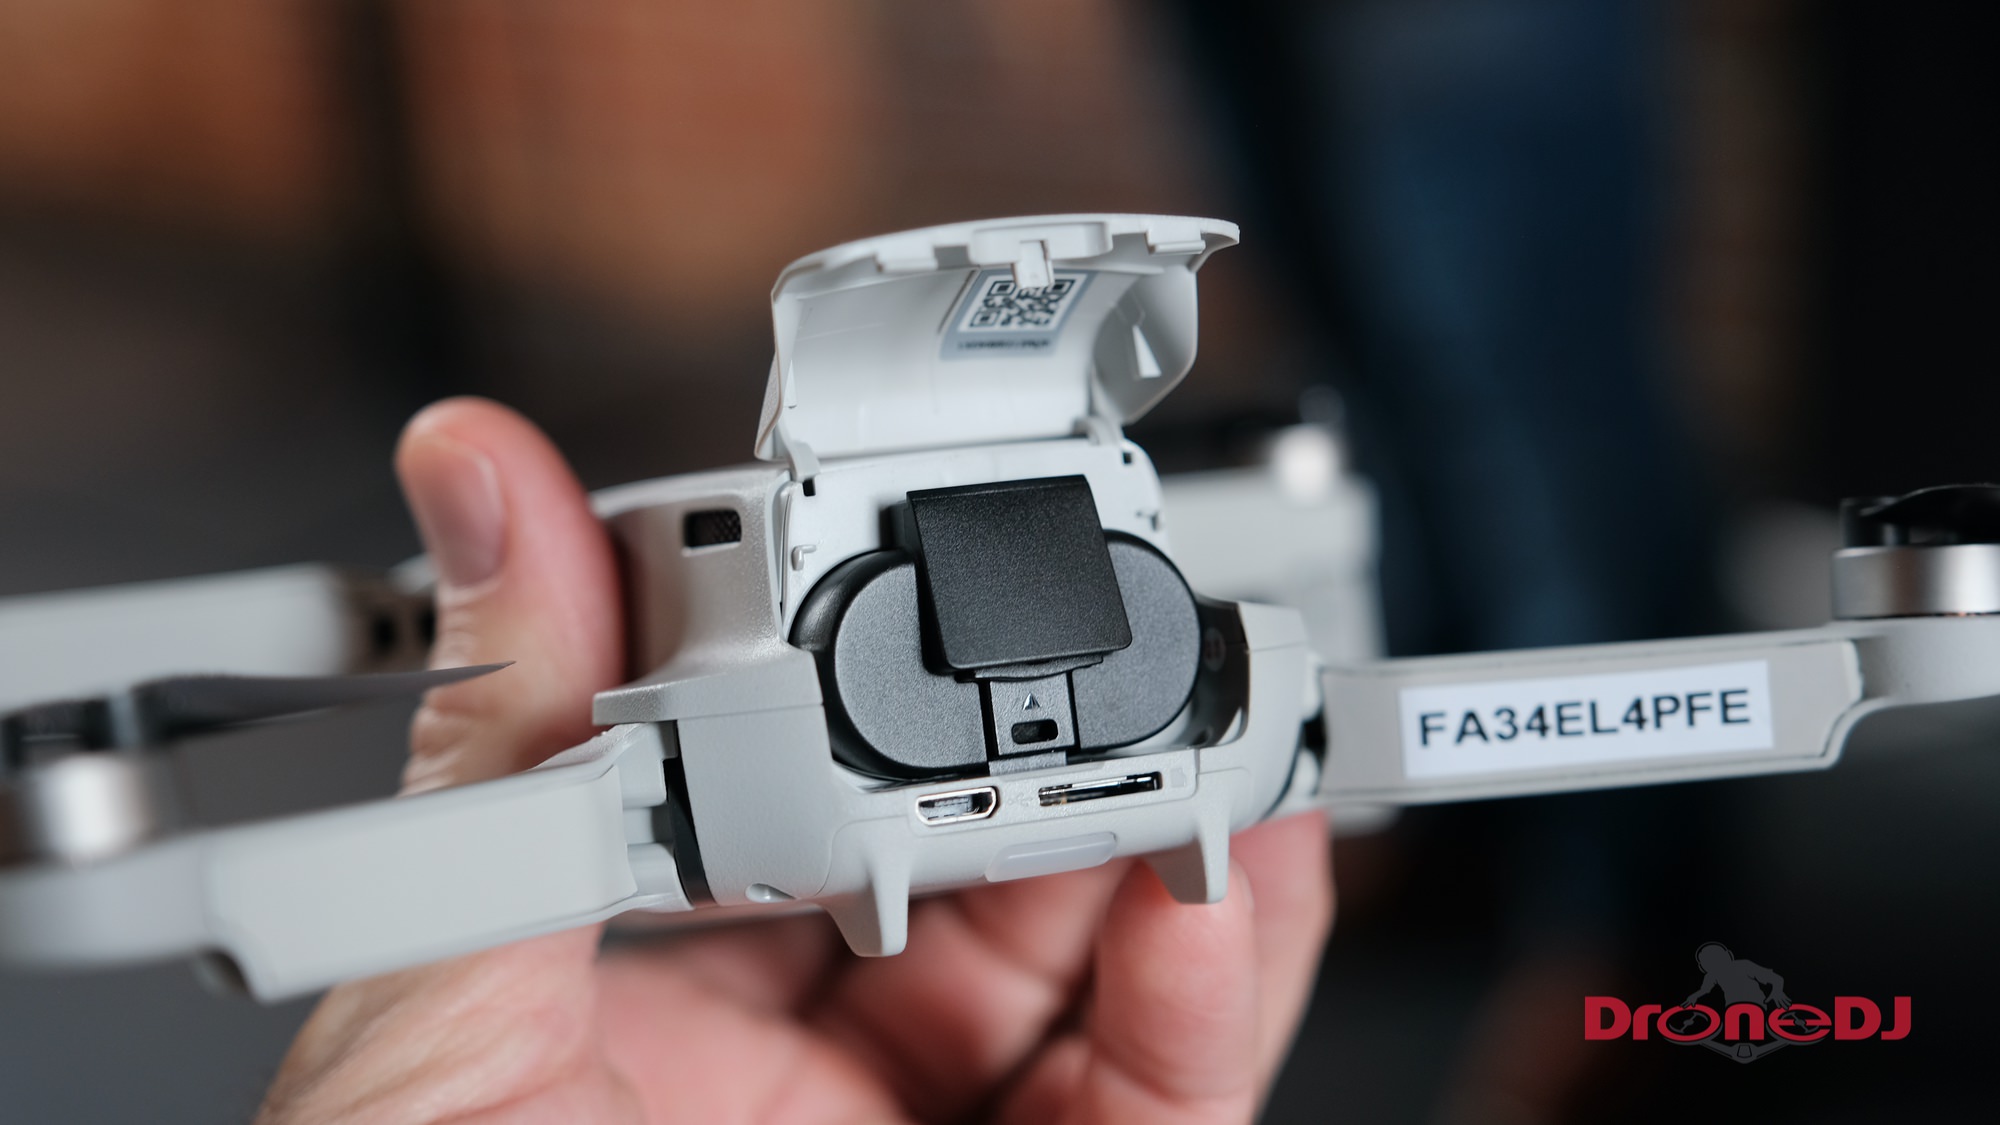 DJI Mavic Mini introduced — new $399 Ultra-Light drone weighs only